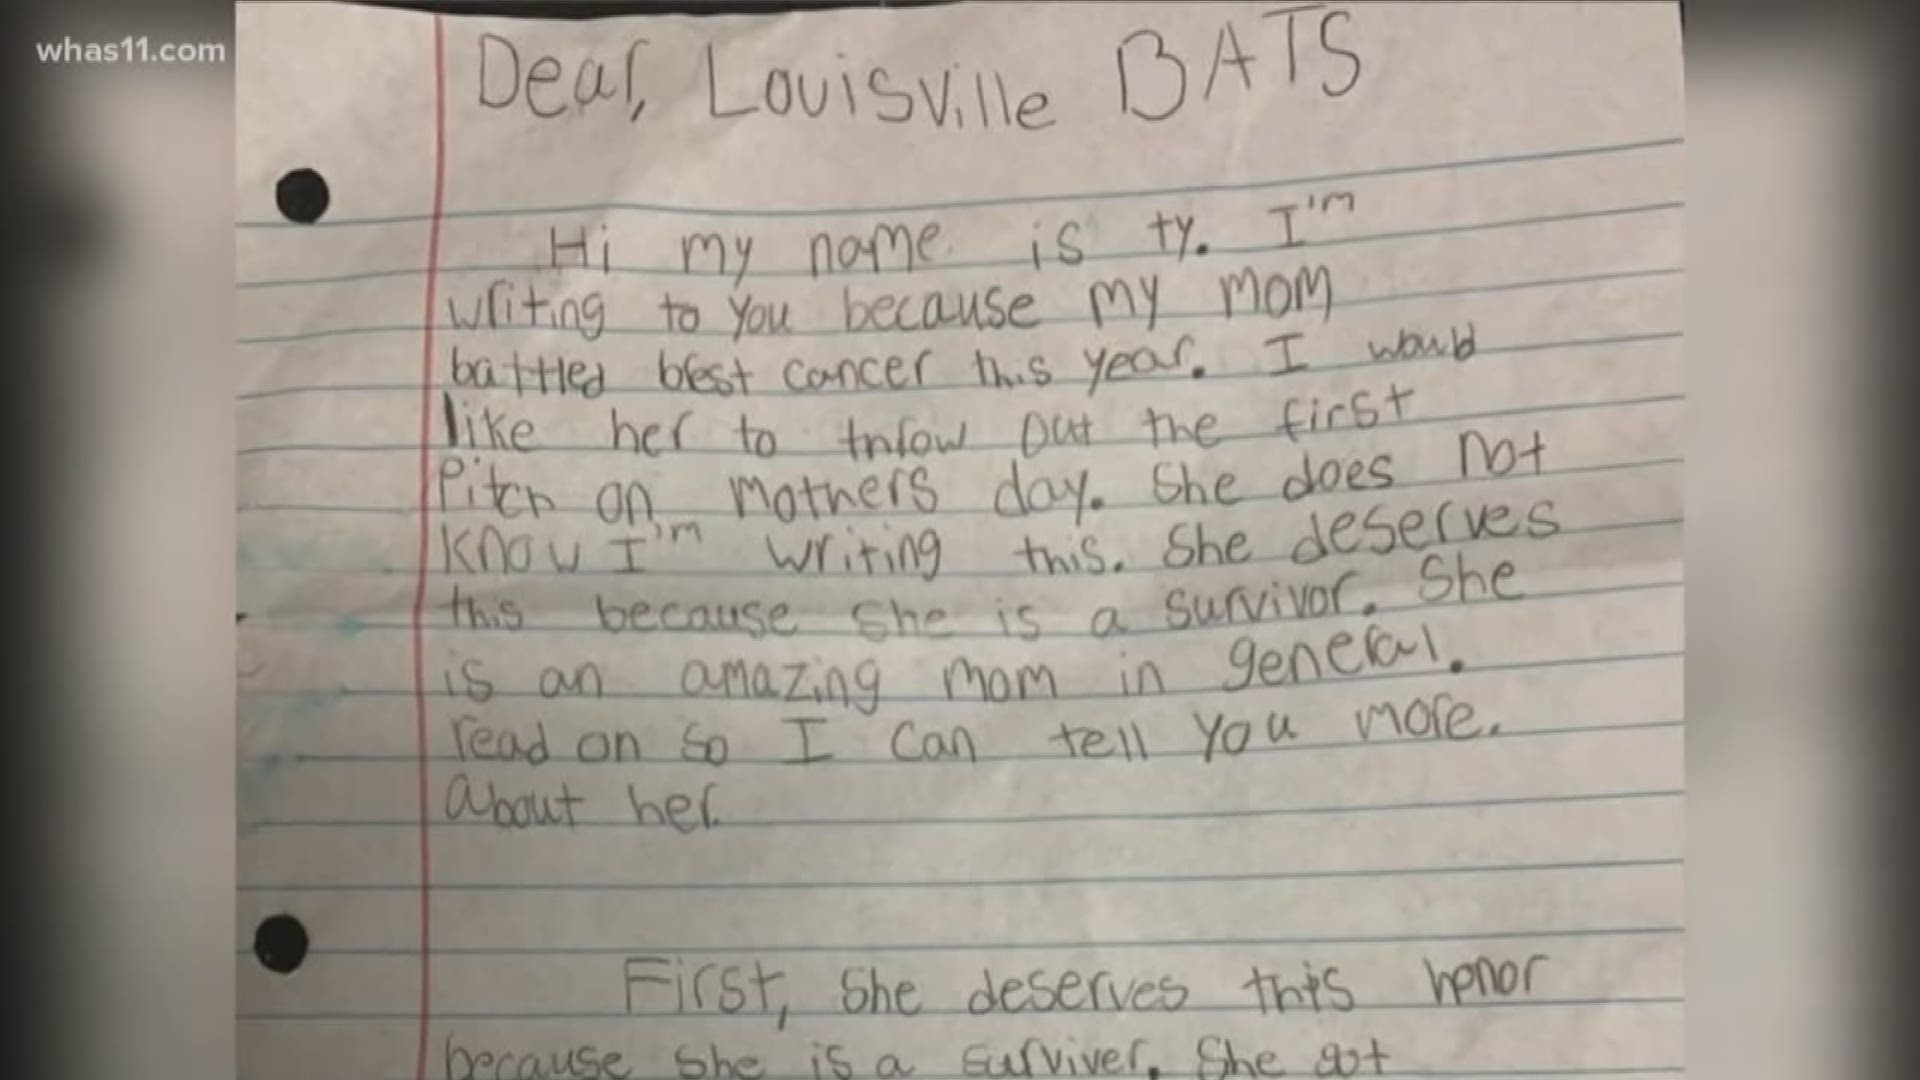 Ty Westerman sent a letter to the Louisville Bats asking if his mother could throw the first pitch for Mother's Day.